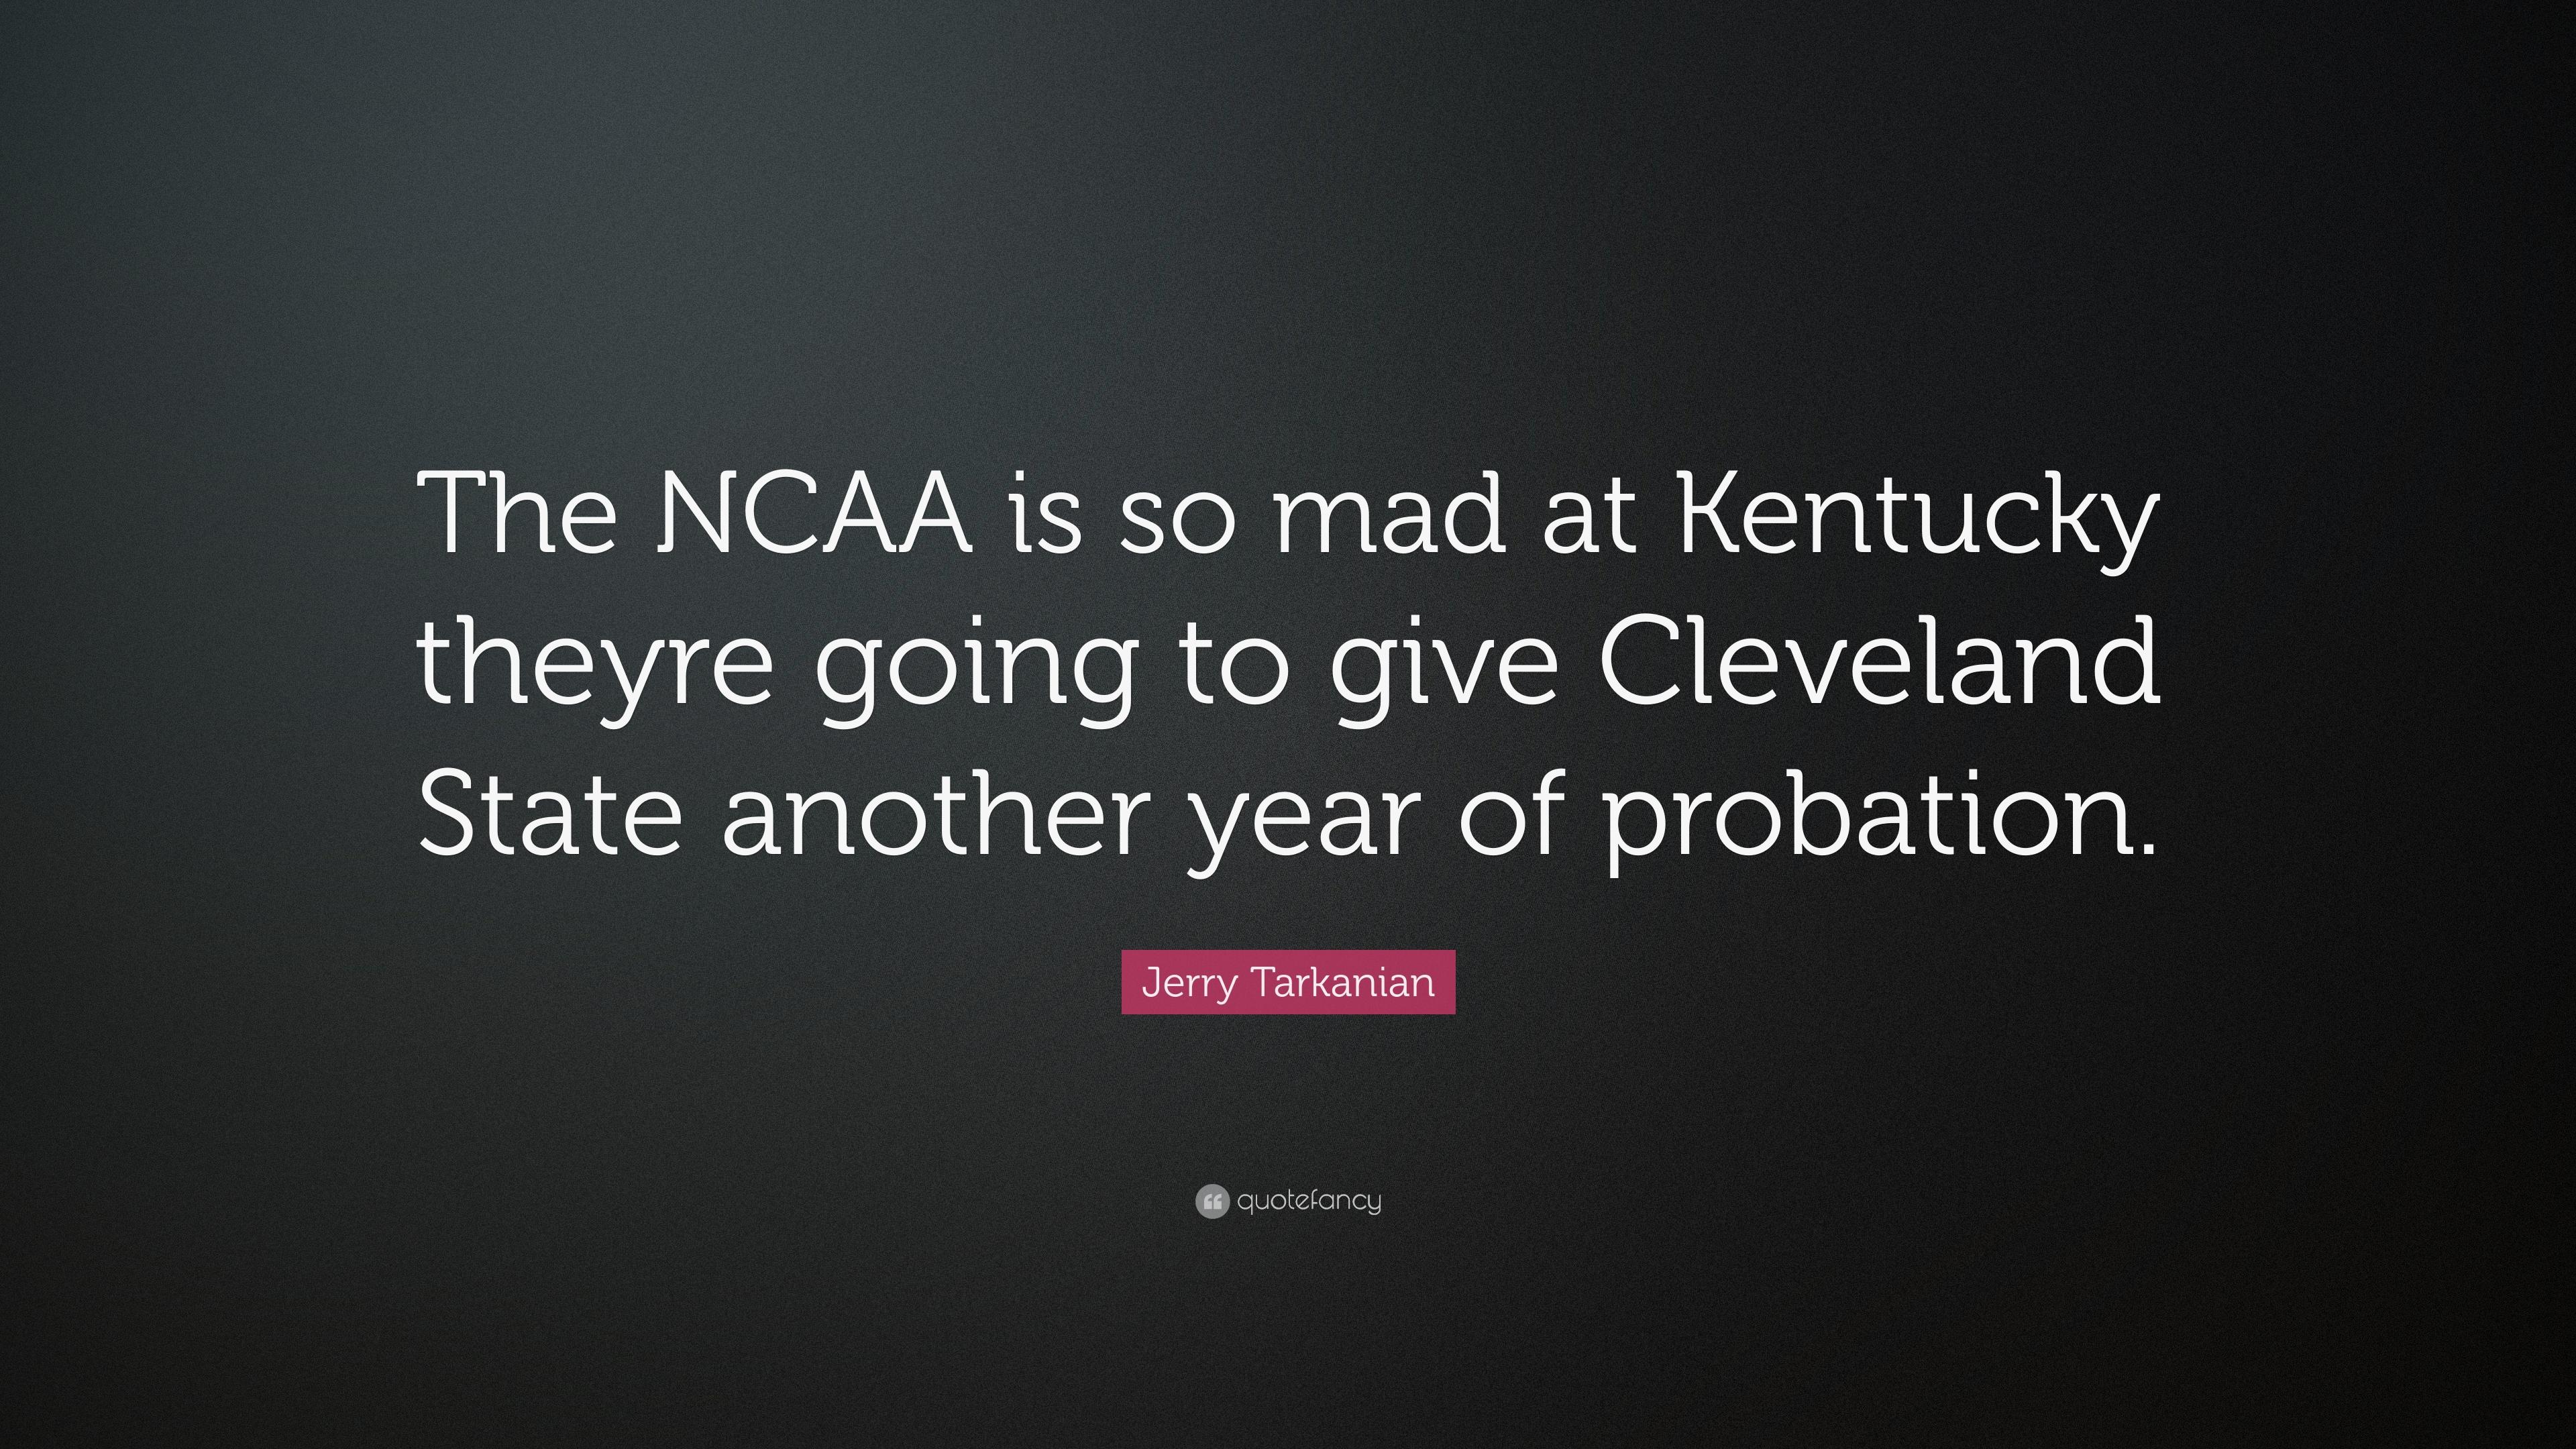 Jerry Tarkanian Quote: “The NCAA is so mad at Kentucky theyre going